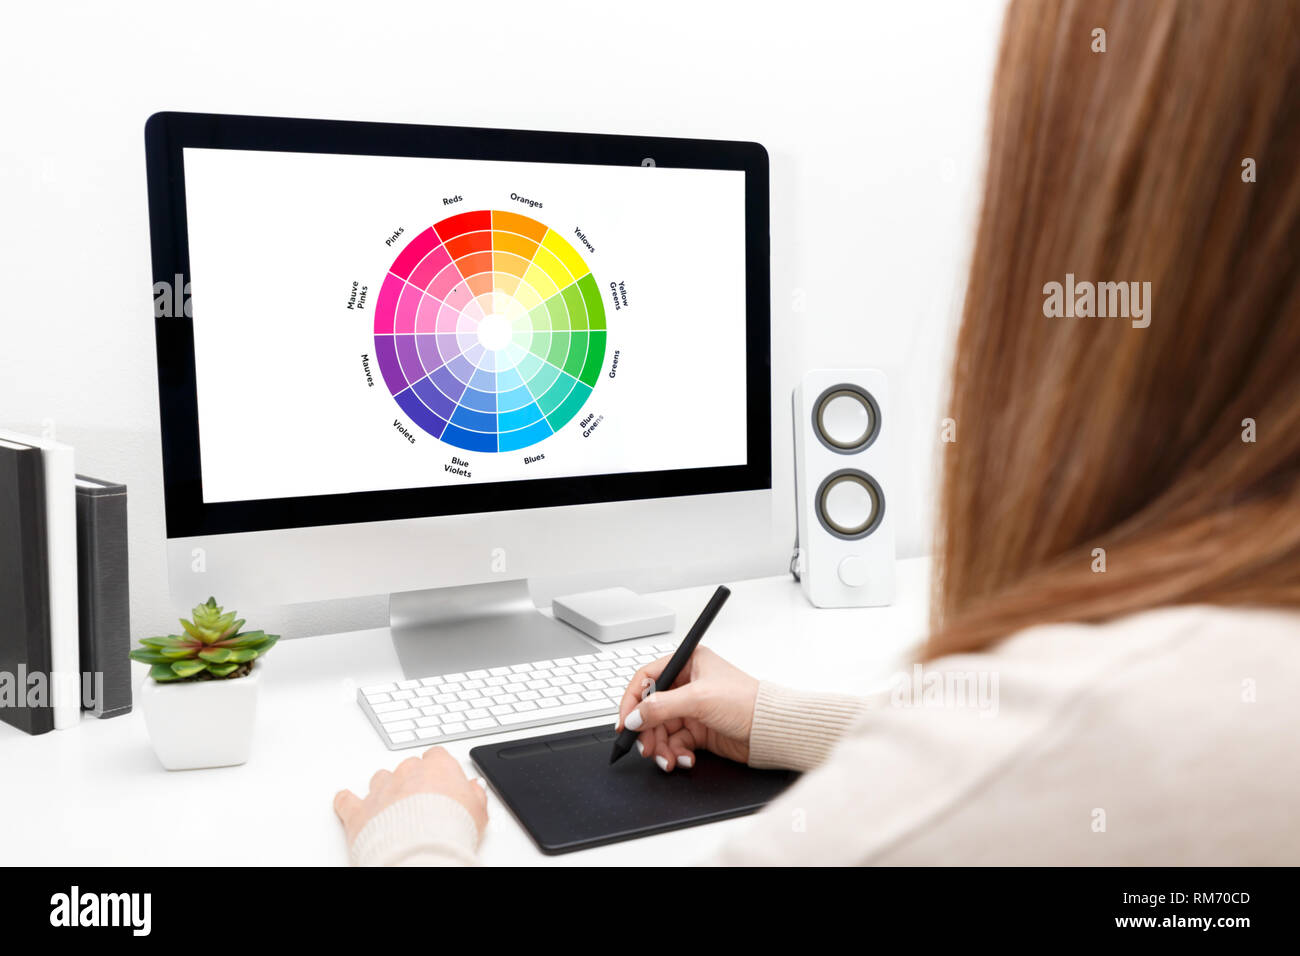 Young Designer Working At Her Desk Using A Colour Wheel Stock